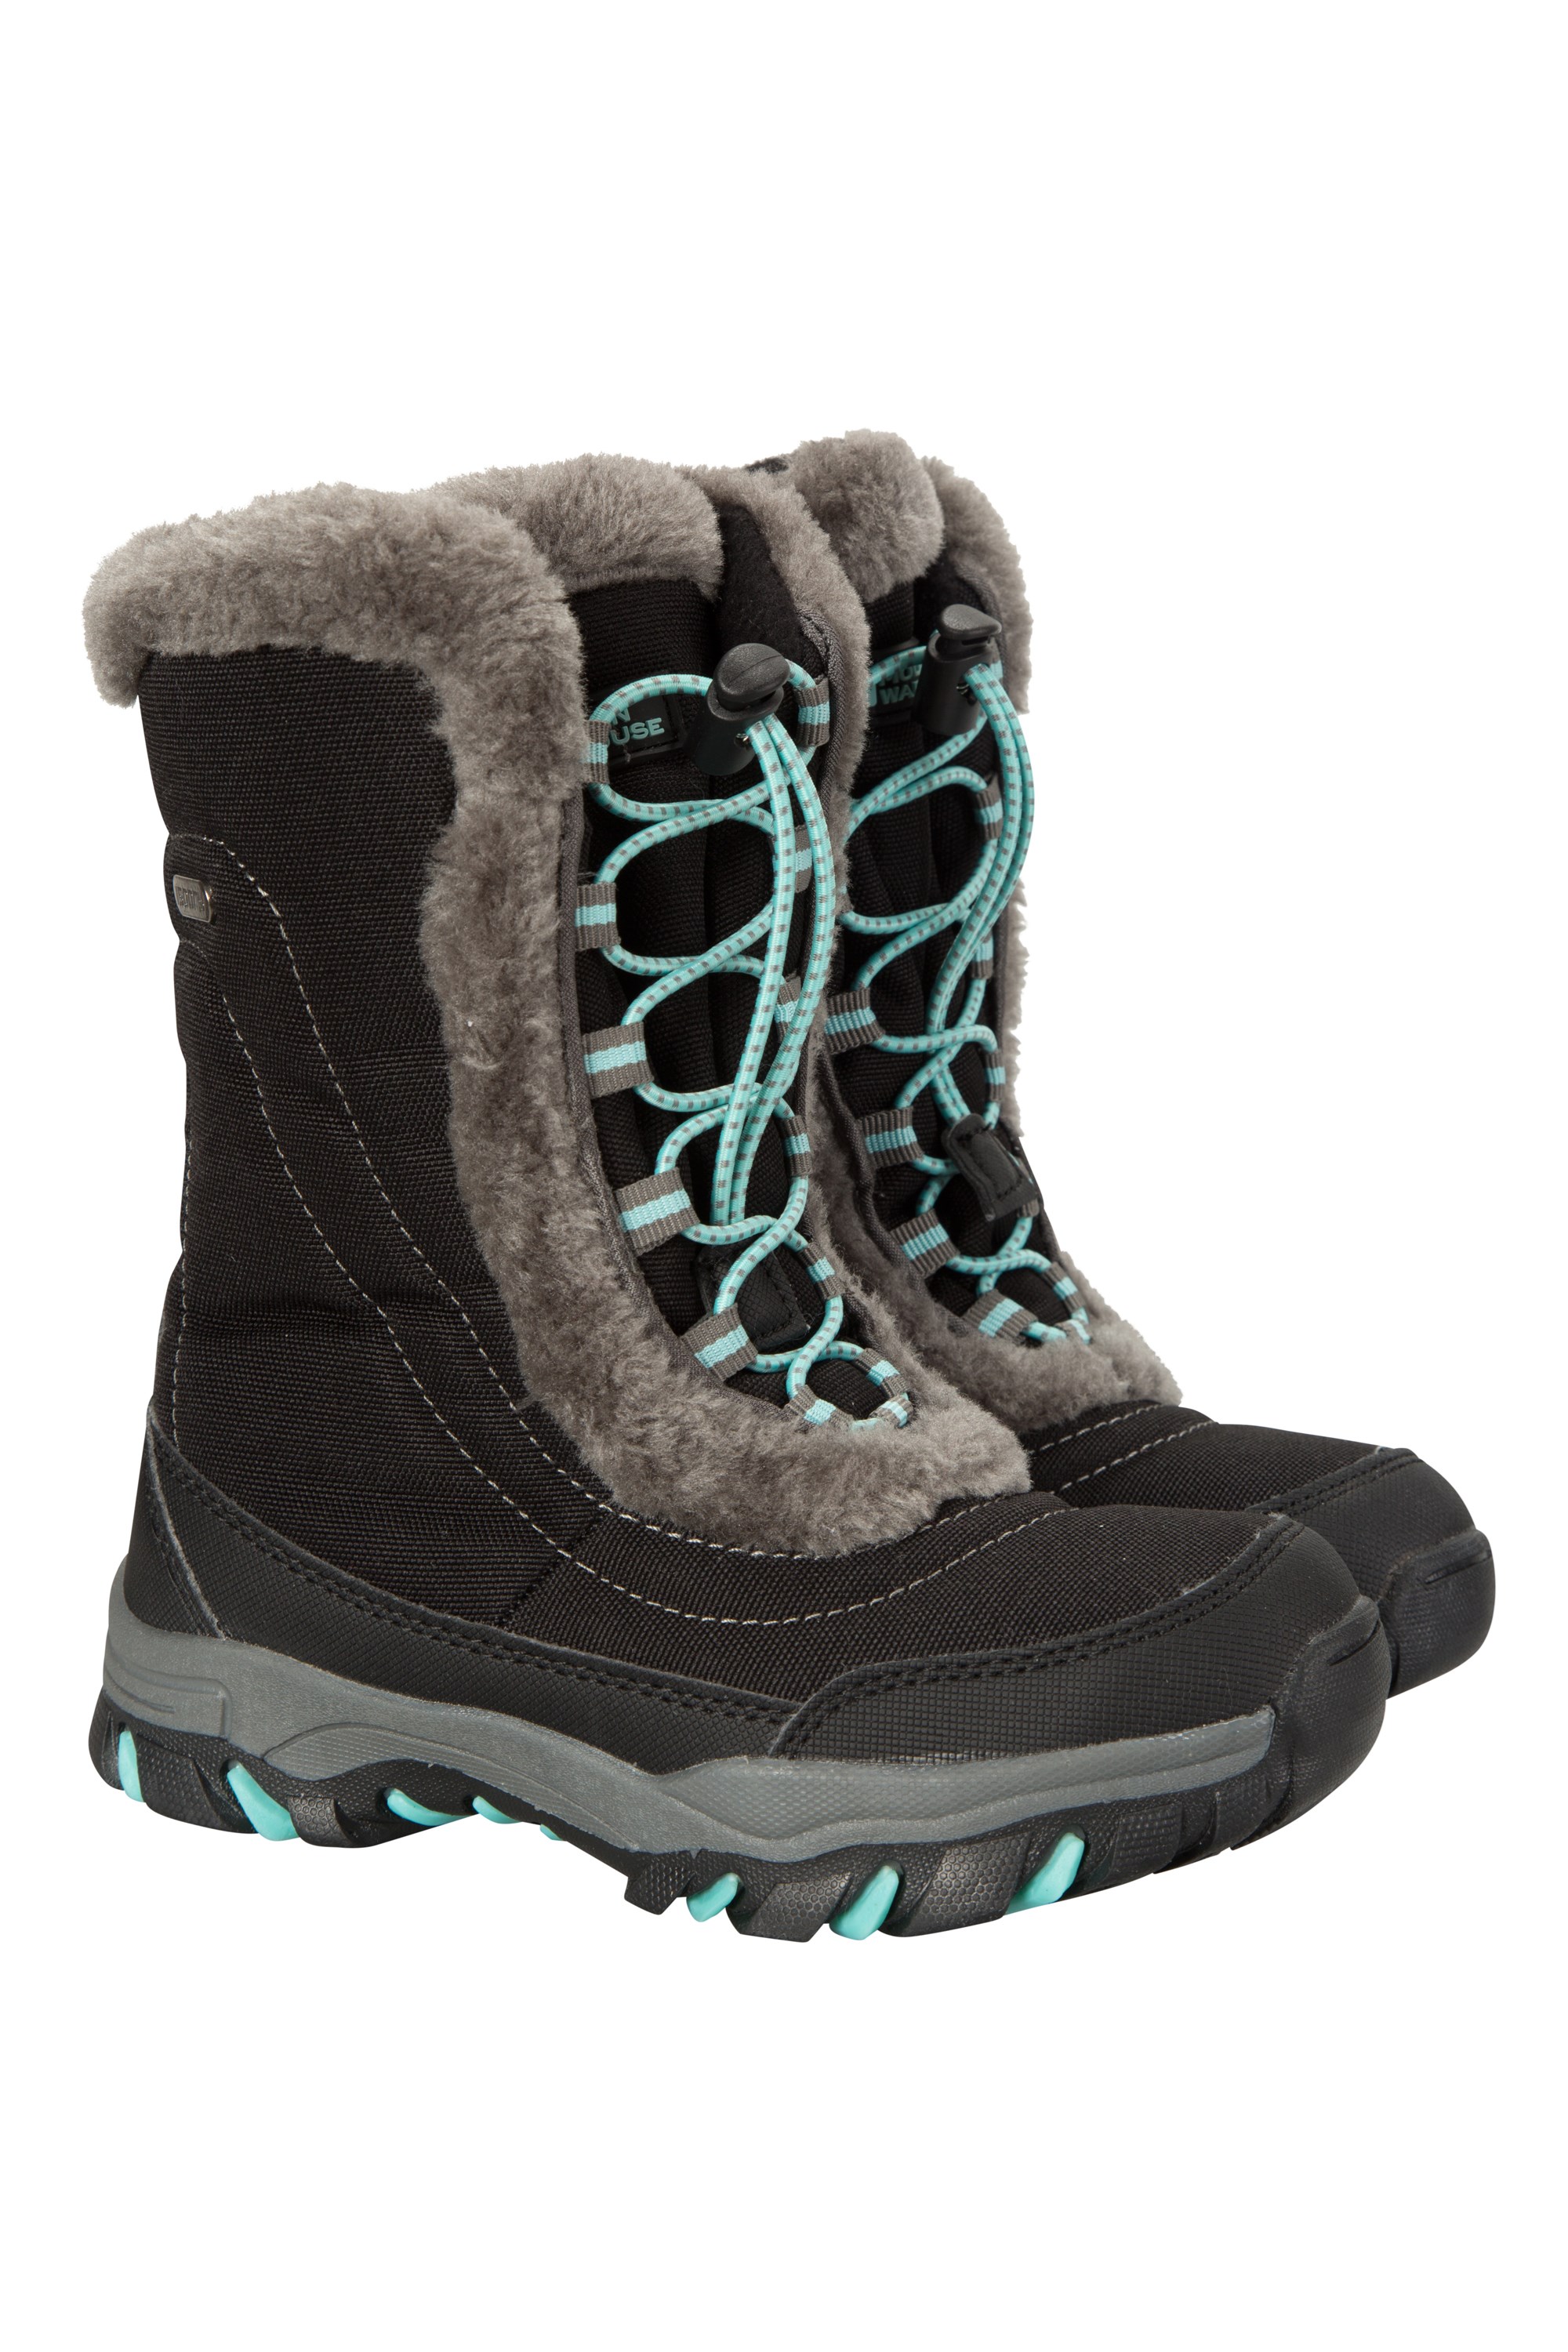 youth waterproof snow boots